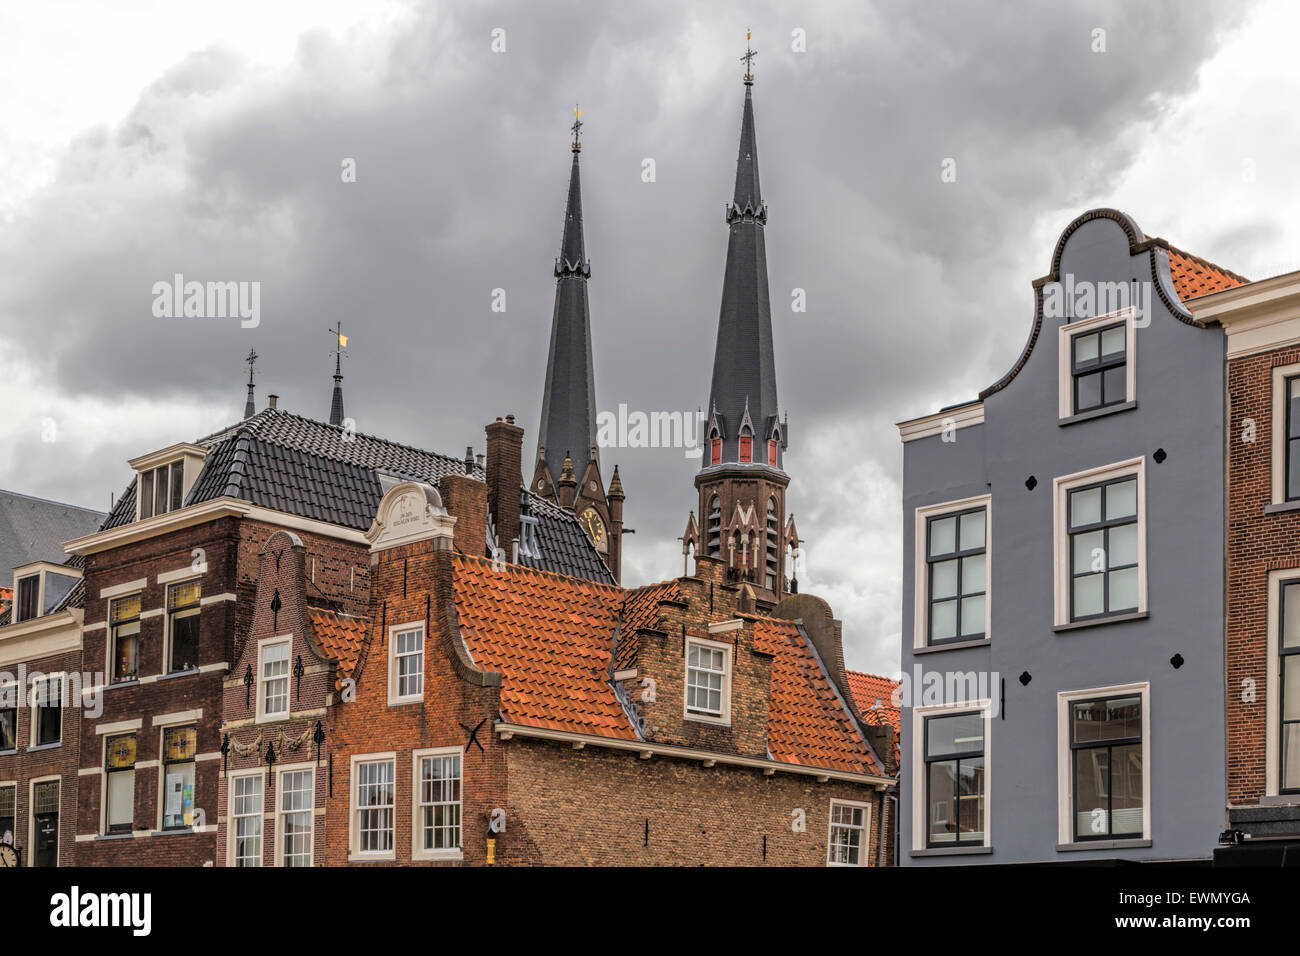 Gabled architecture along Market Square ( Markt ) and view on Maria van Jessekerk, Delft, South Holland, The Netherlands. Stock Photo